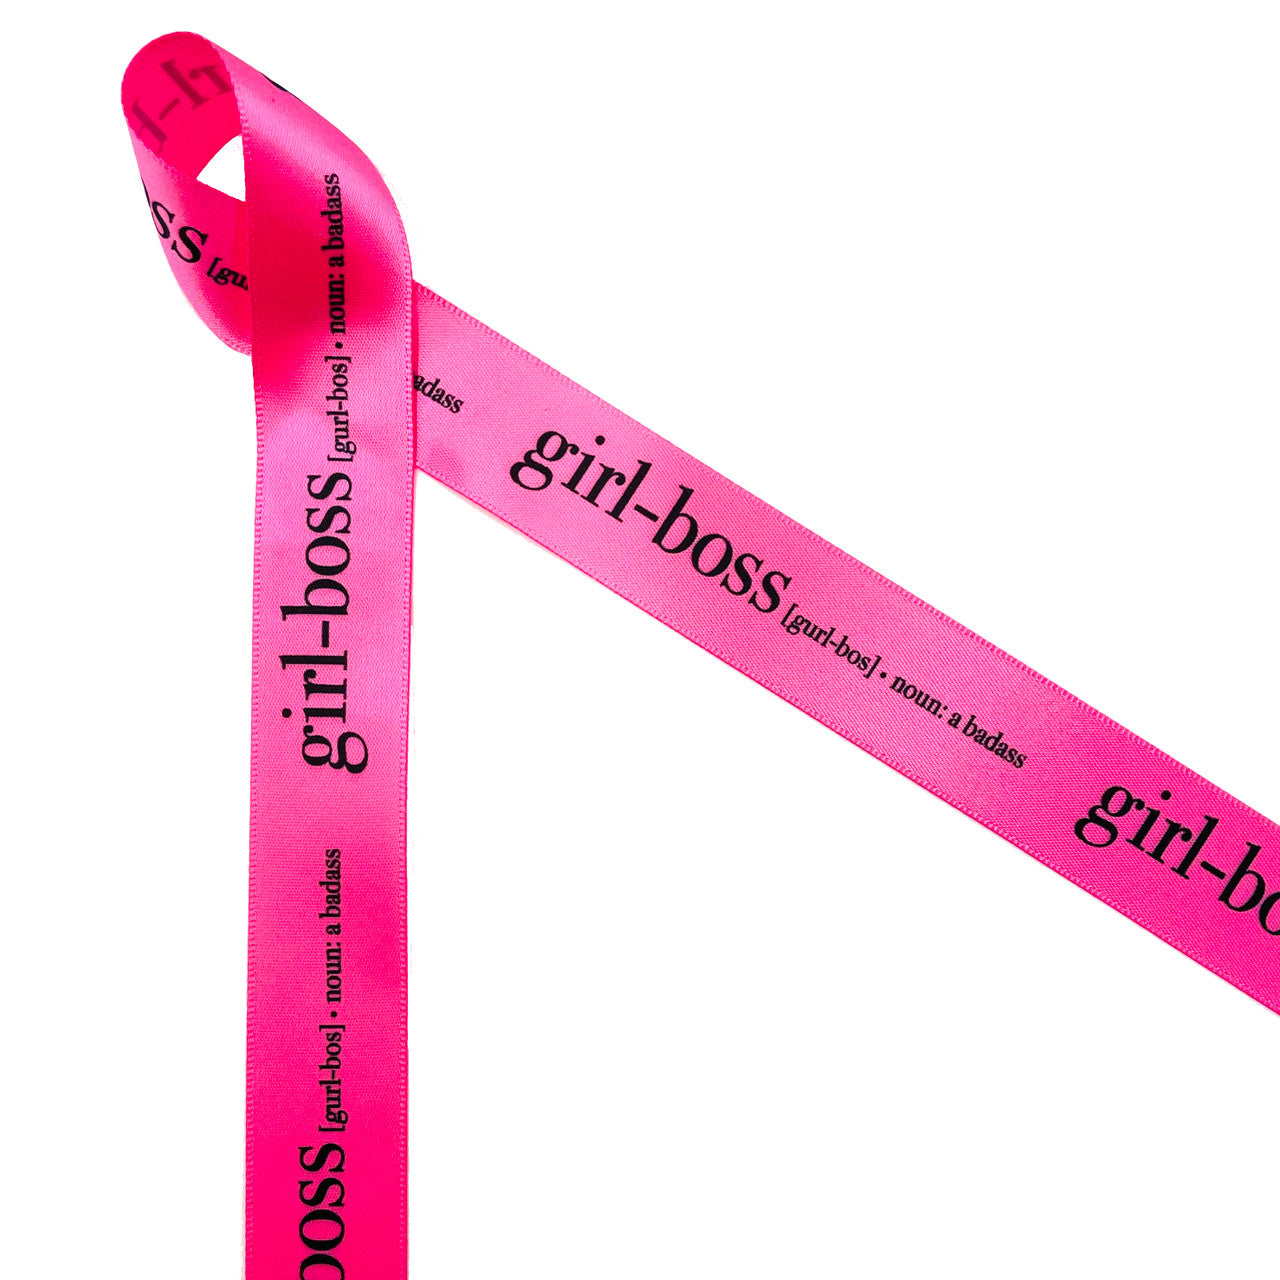 Girl Boss ribbon with black font and definition in black printed